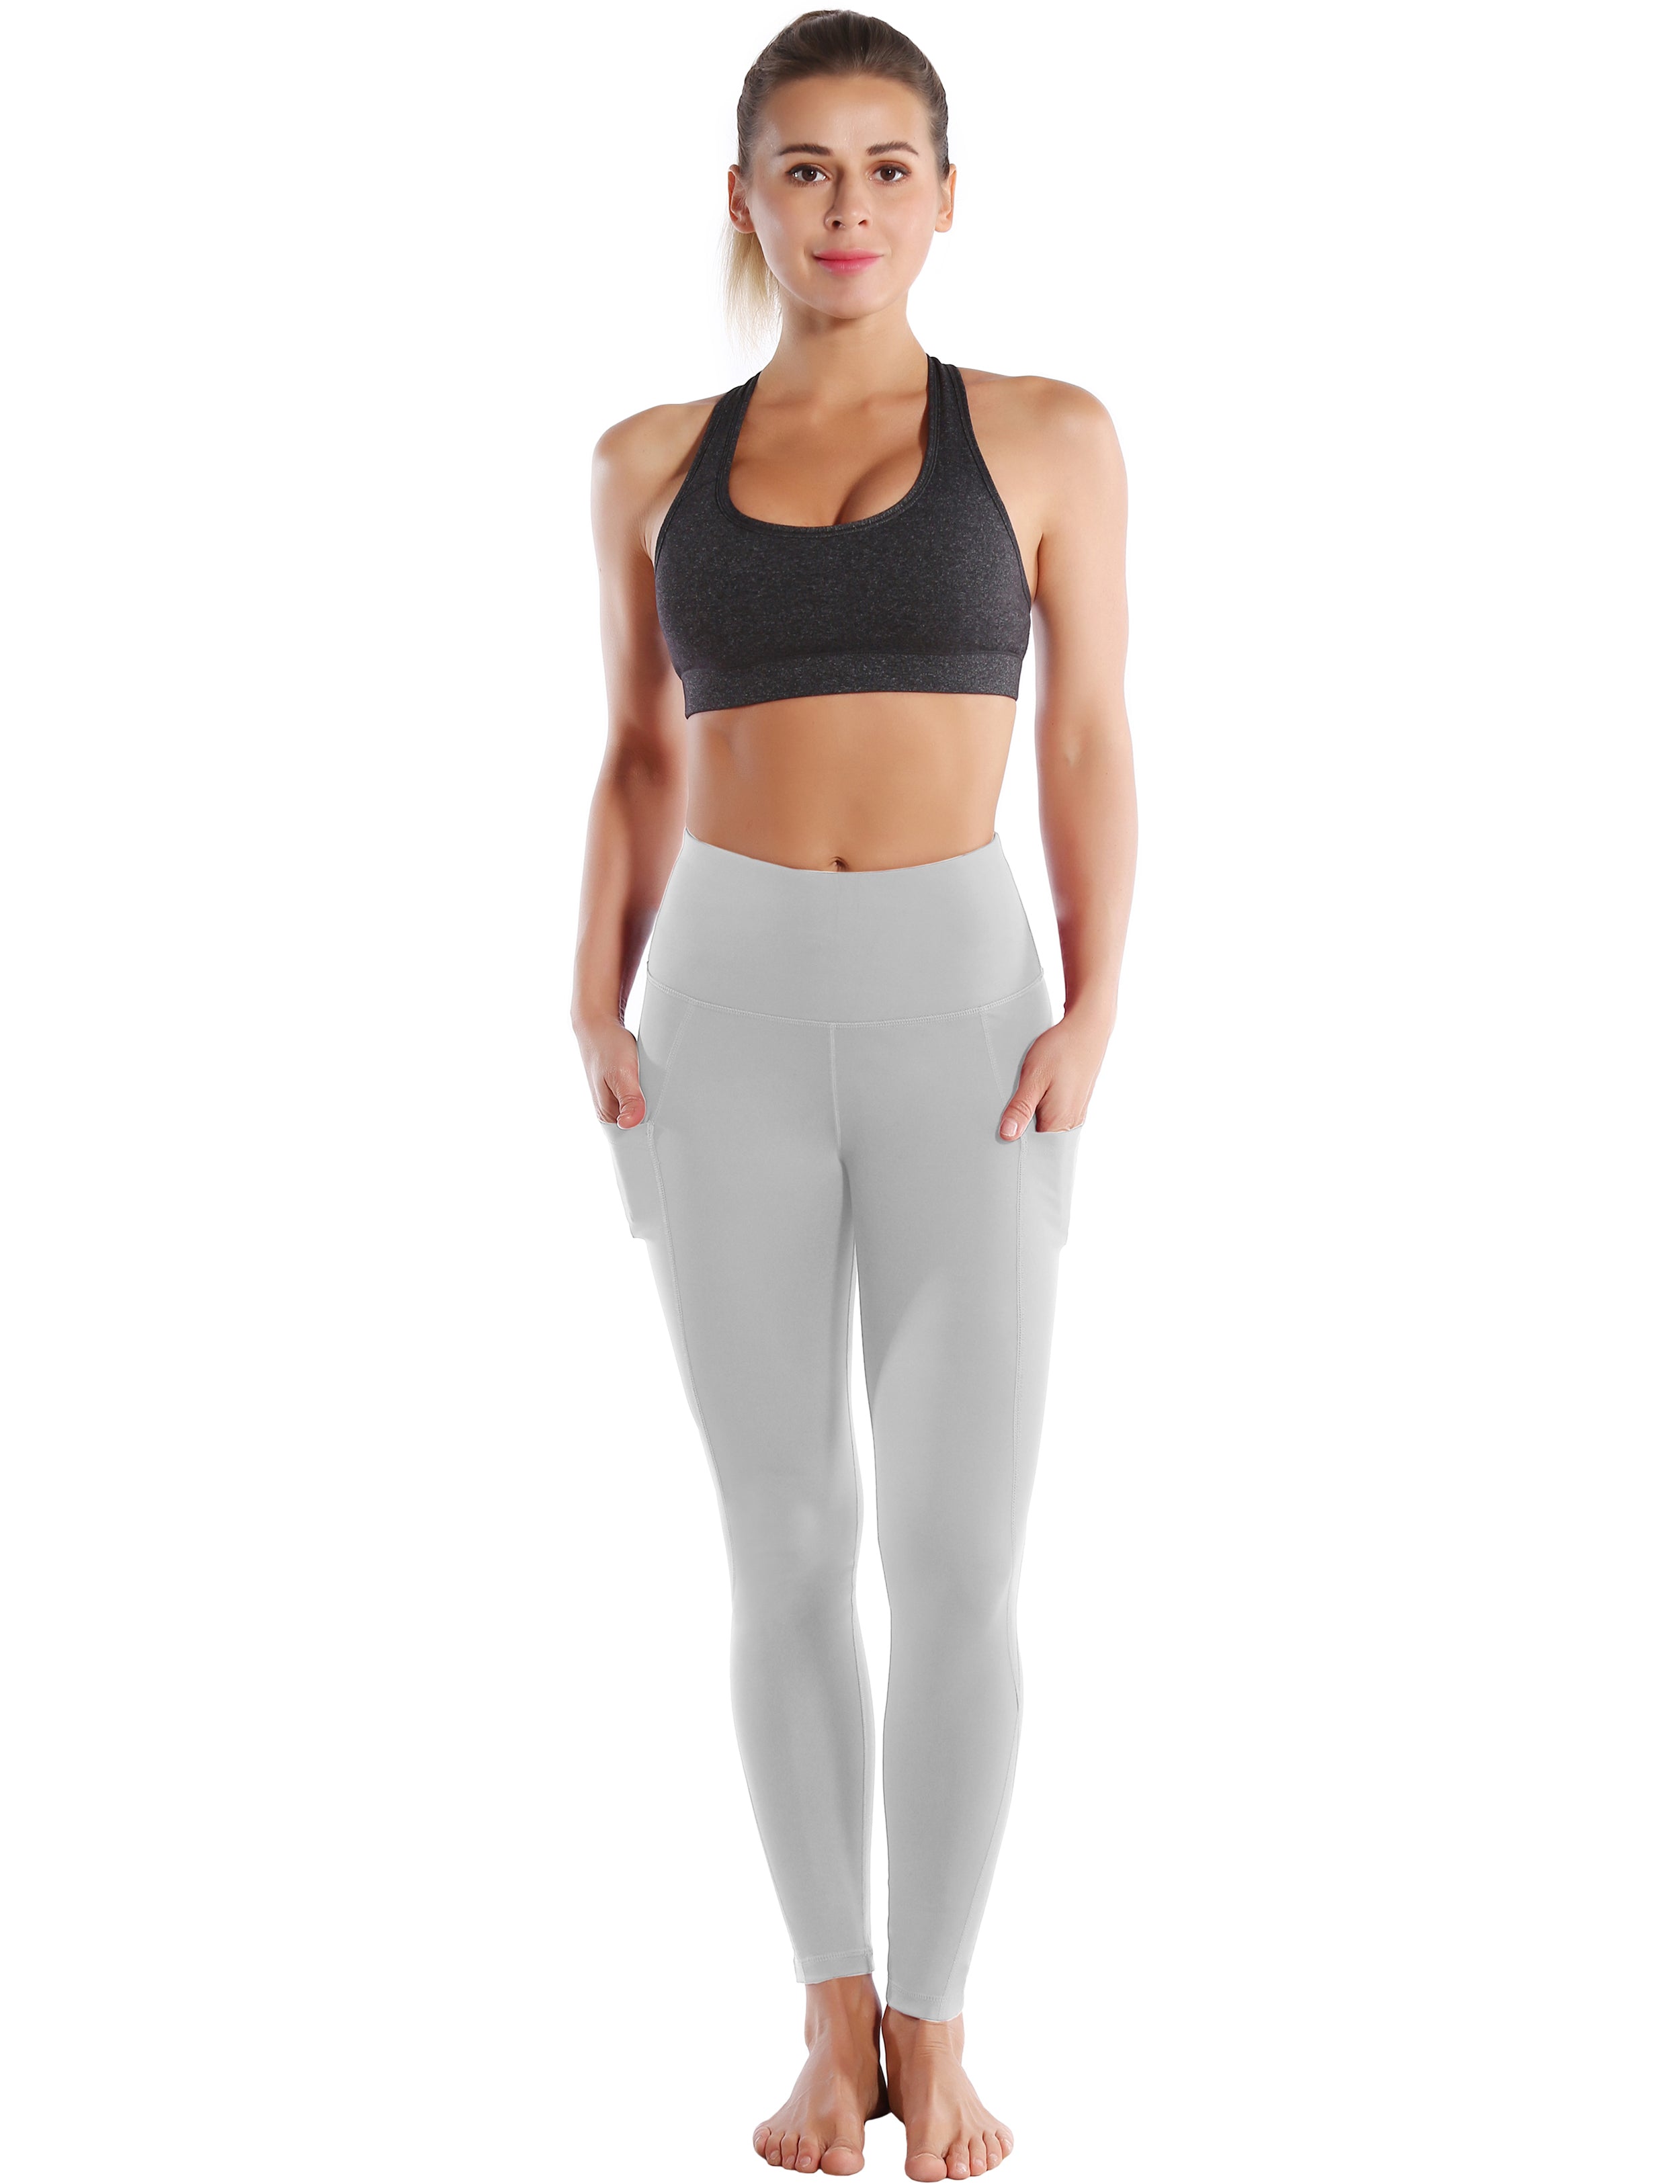 High Waist Side Pockets Gym Pants lightgray 75% Nylon, 25% Spandex Fabric doesn't attract lint easily 4-way stretch No see-through Moisture-wicking Tummy control Inner pocket